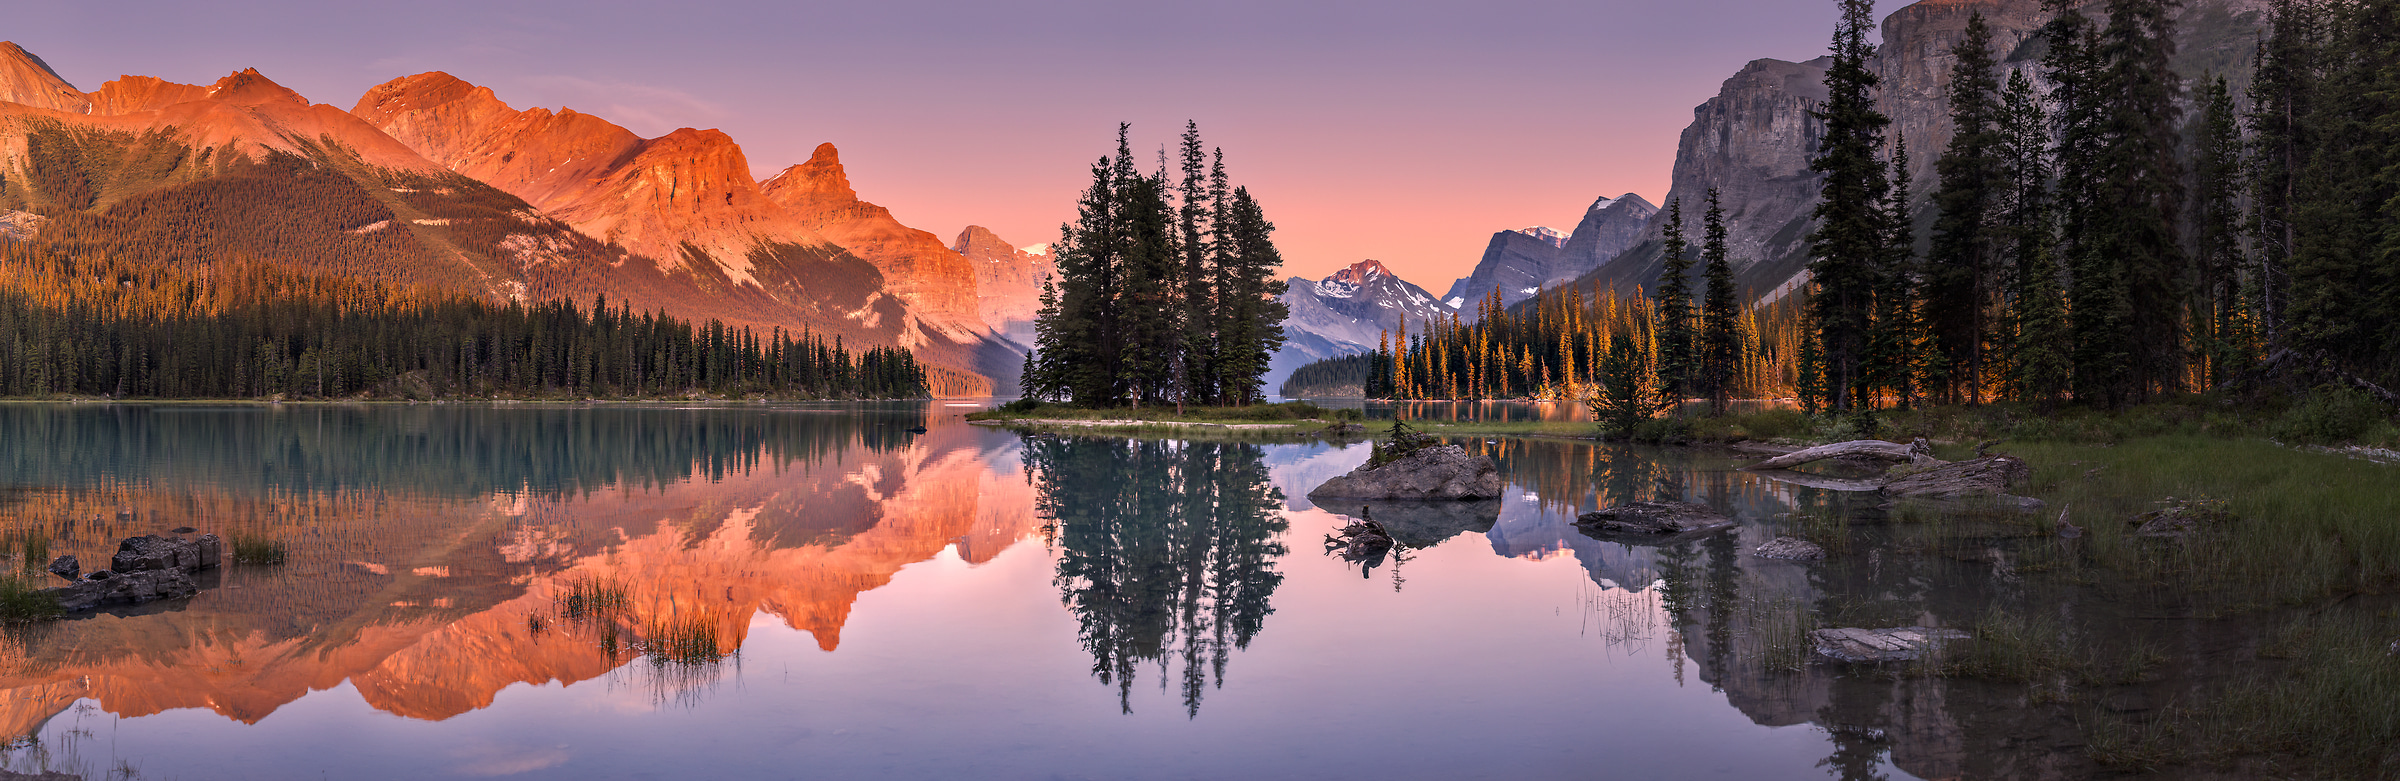 164 megapixels! A very high resolution, large-format VAST photo print of a peaceful landscape with mountains, trees, and a lake; nature photograph created by Chris Collacott in Spirit Island, Jasper National Park, Alberta, Canada.